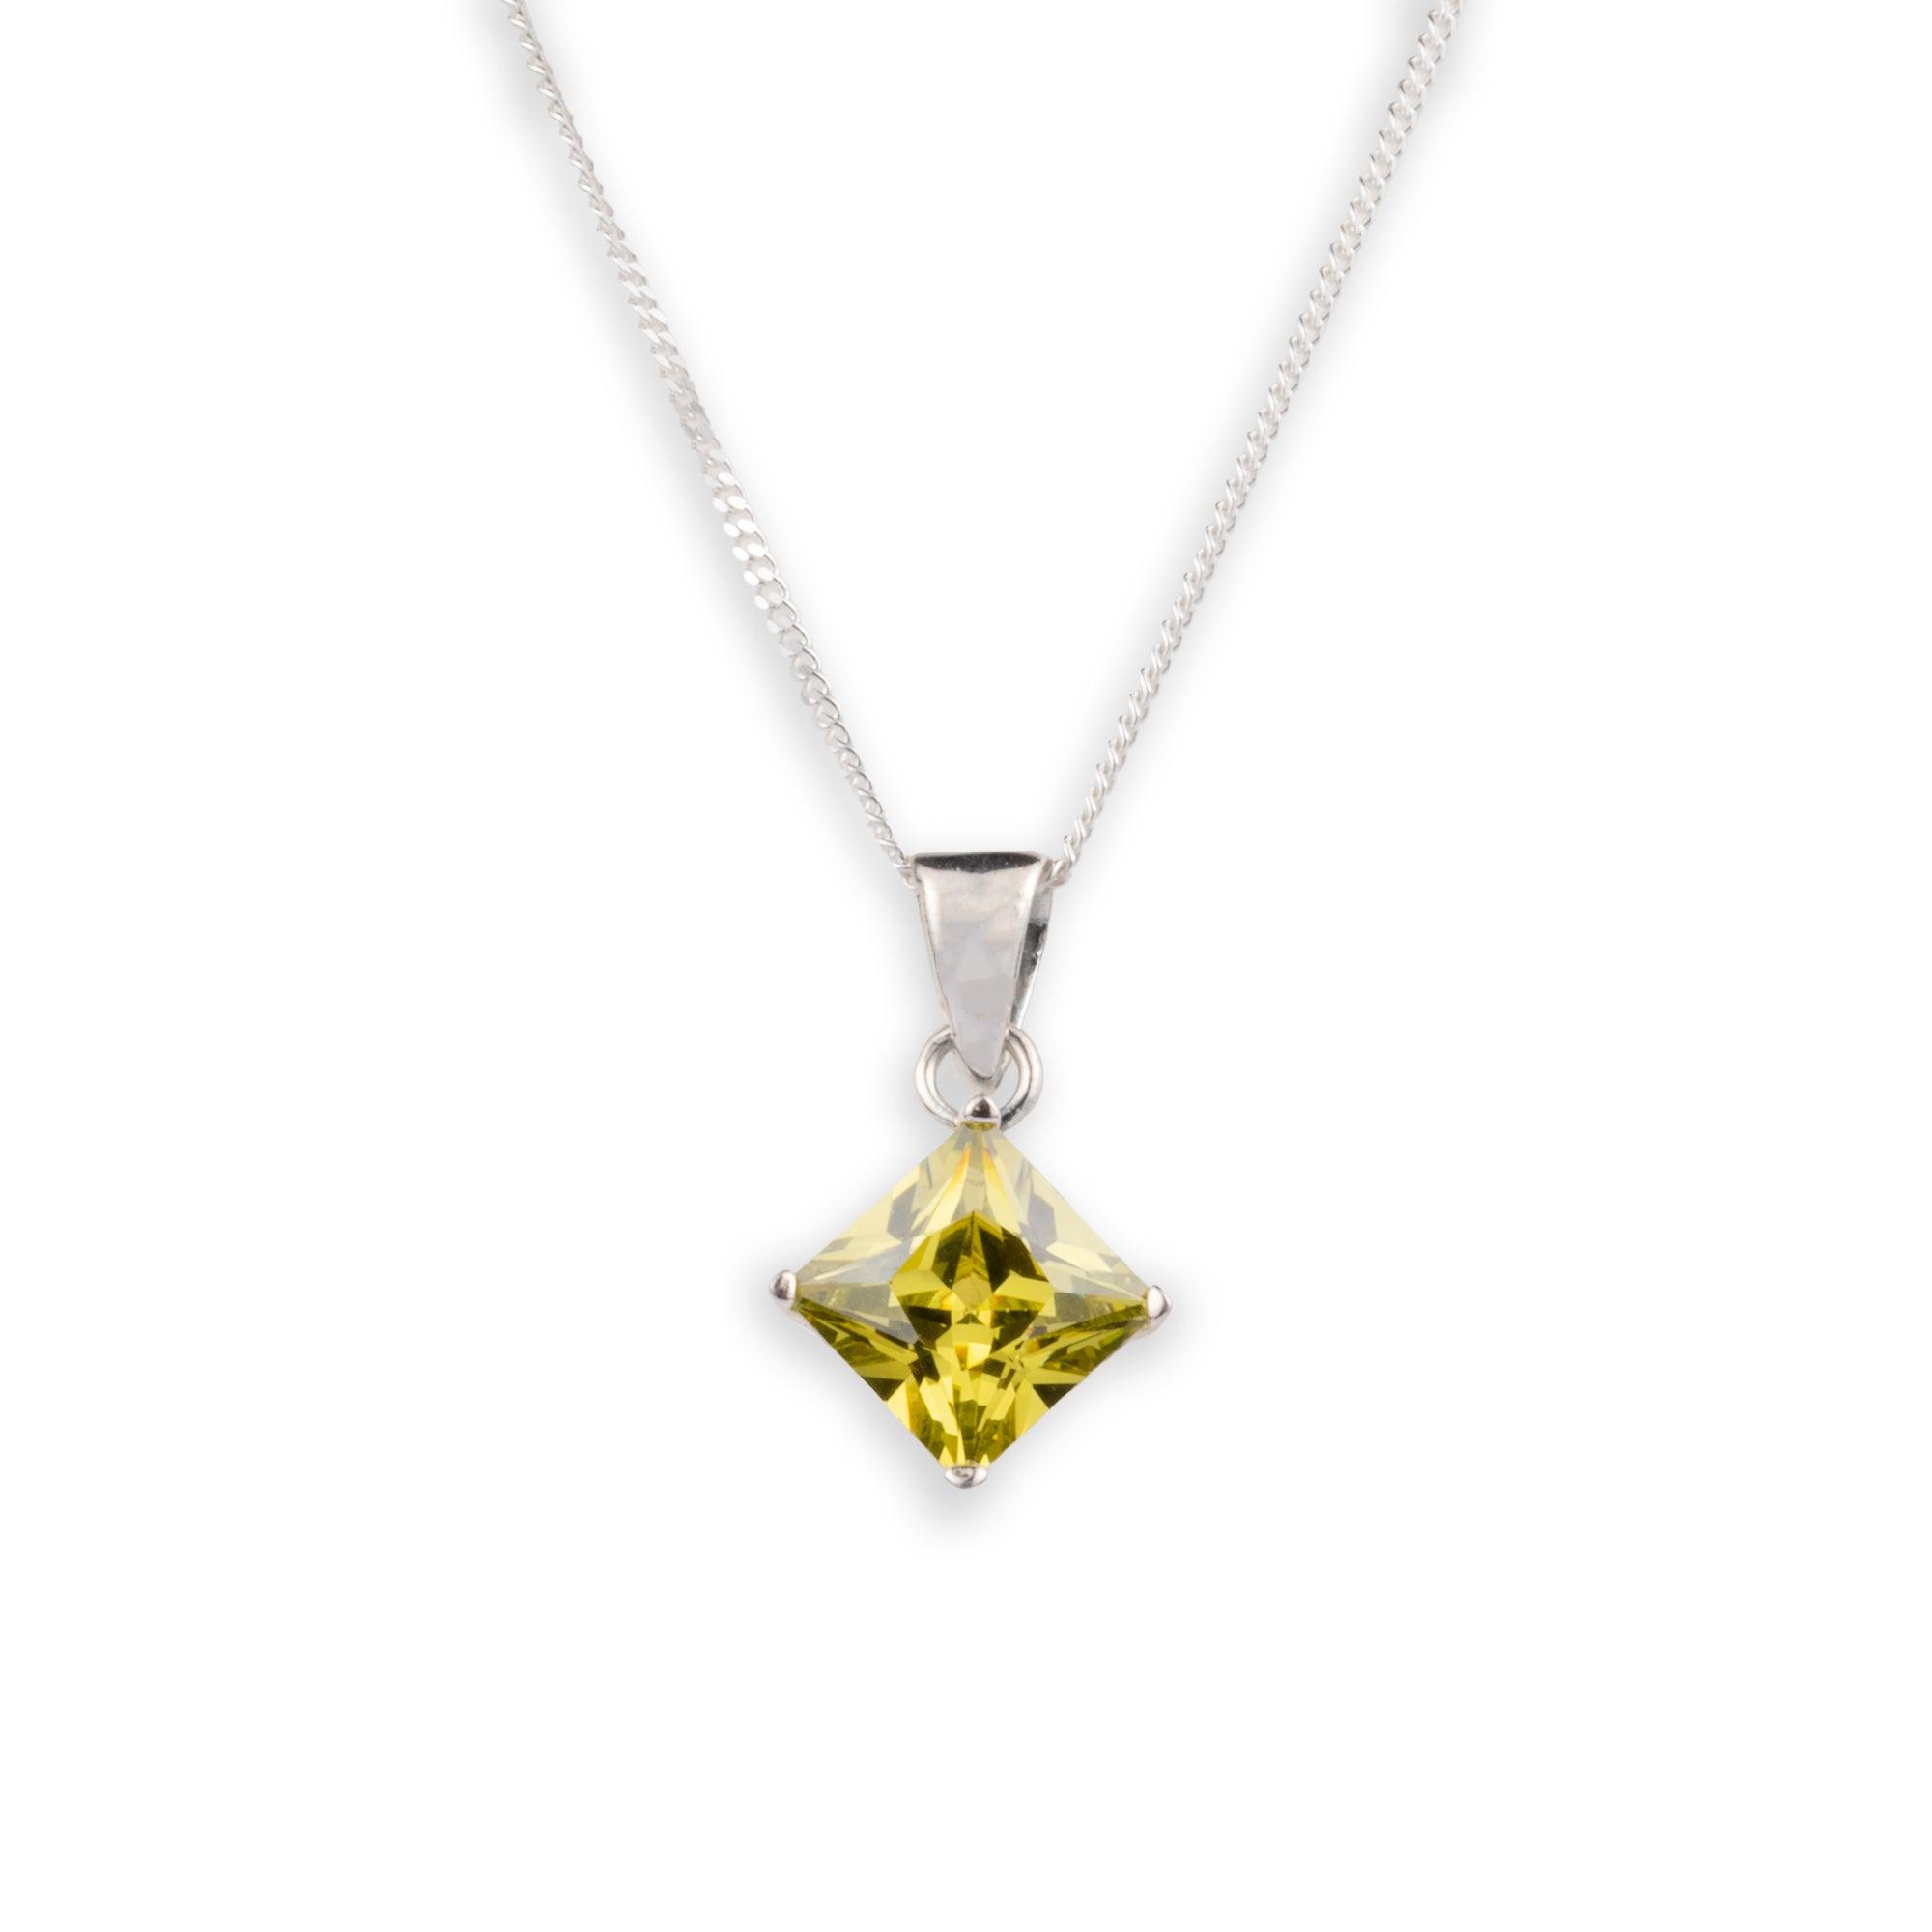 Sterling Silver Peridot Pendant and Adjustable Chain BT4531